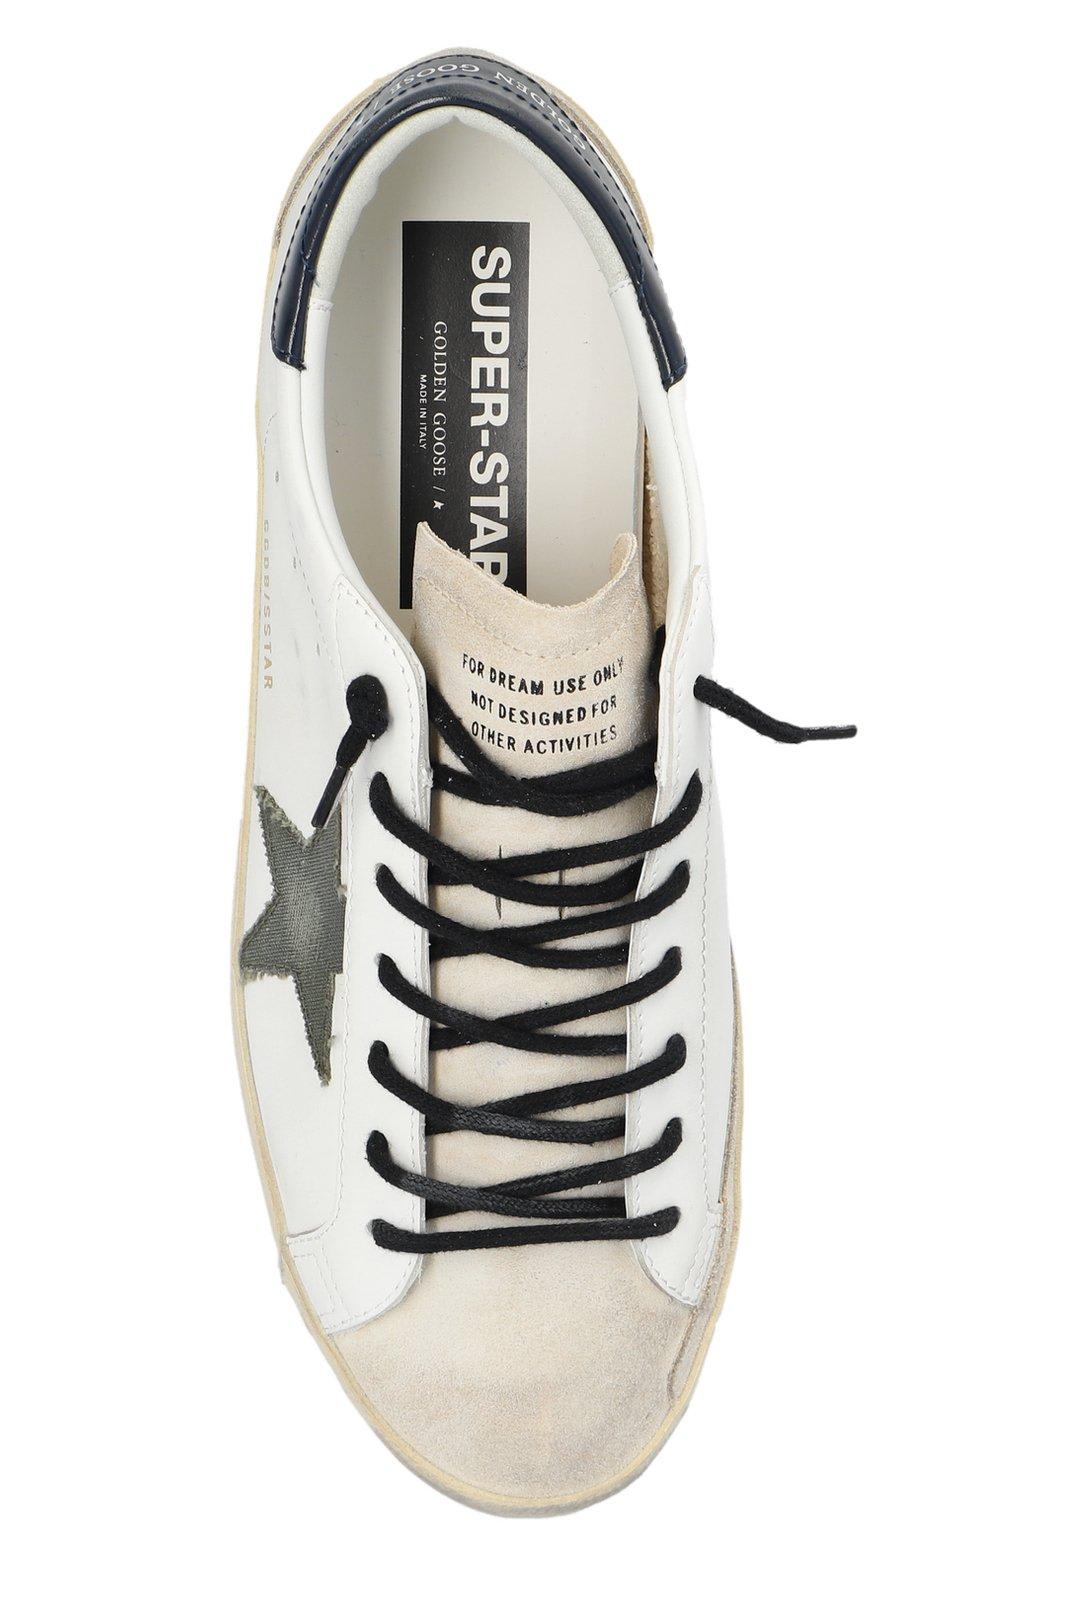 Shop Golden Goose Super-star Sneakers In White/seedpearl/green/blue